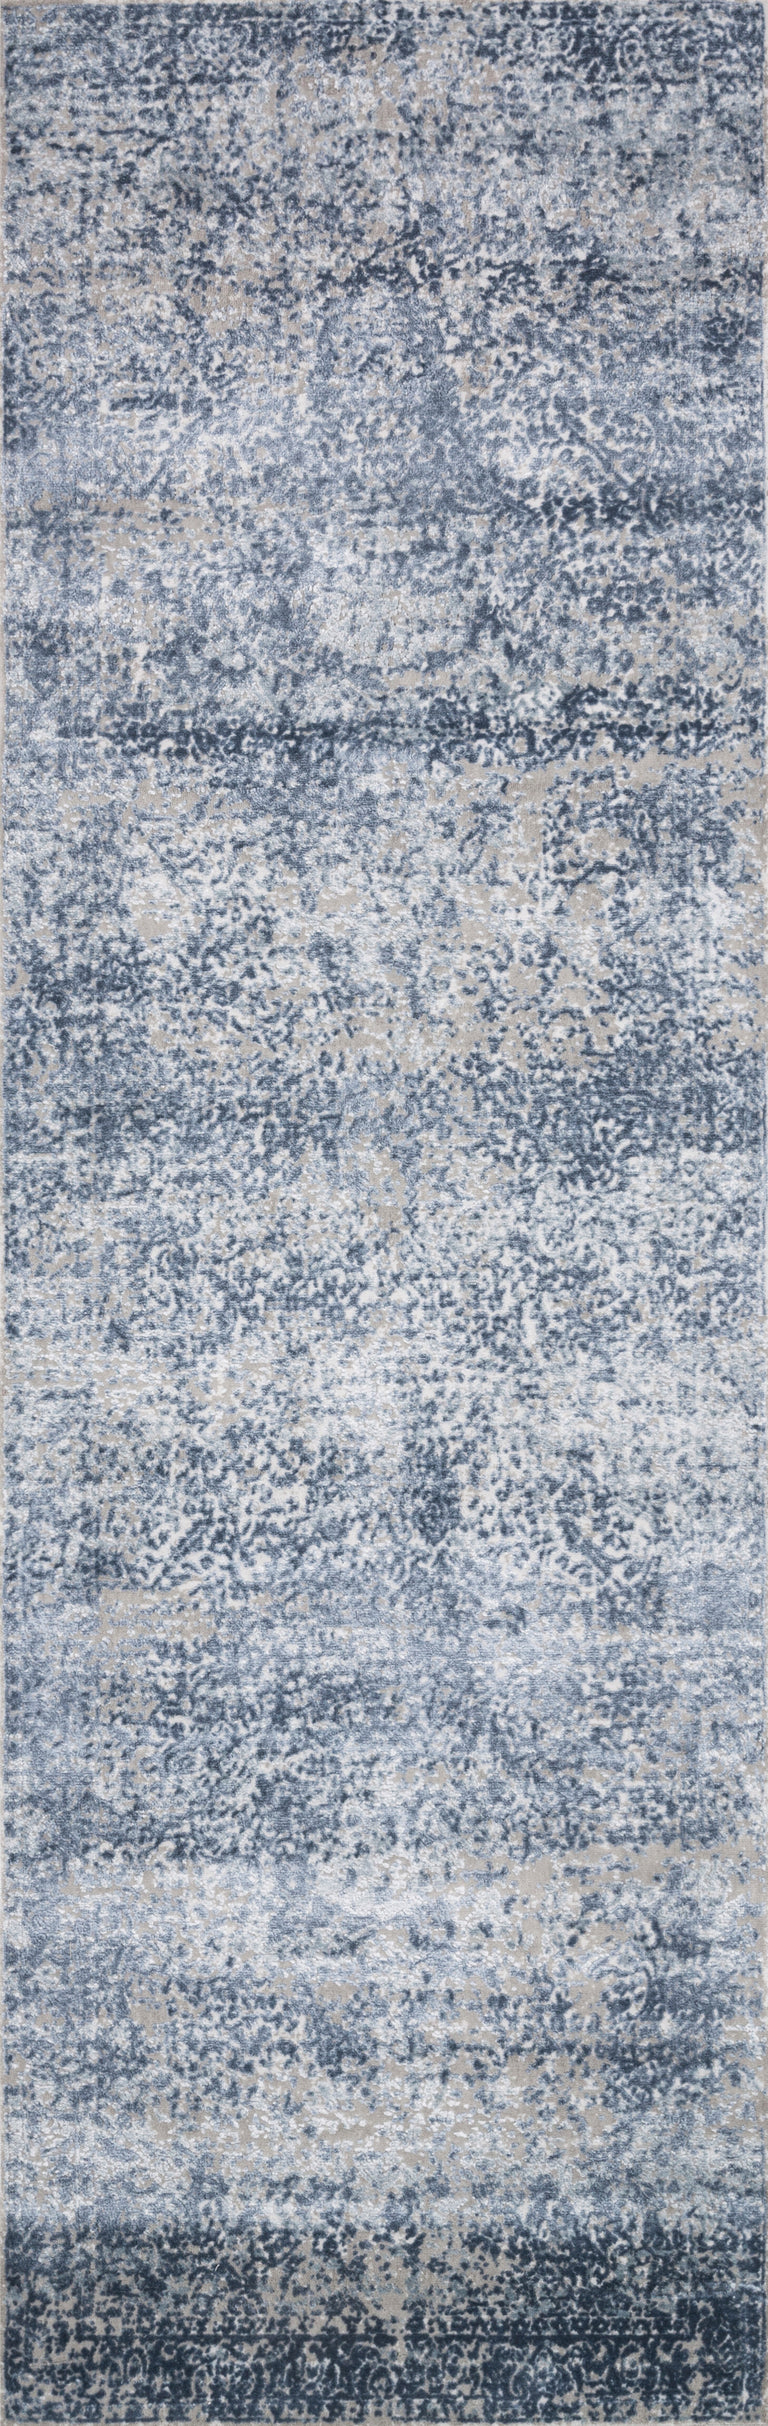 Loloi Rugs Patina Collection Rug in Blue, Stone - 9'6" x 13'